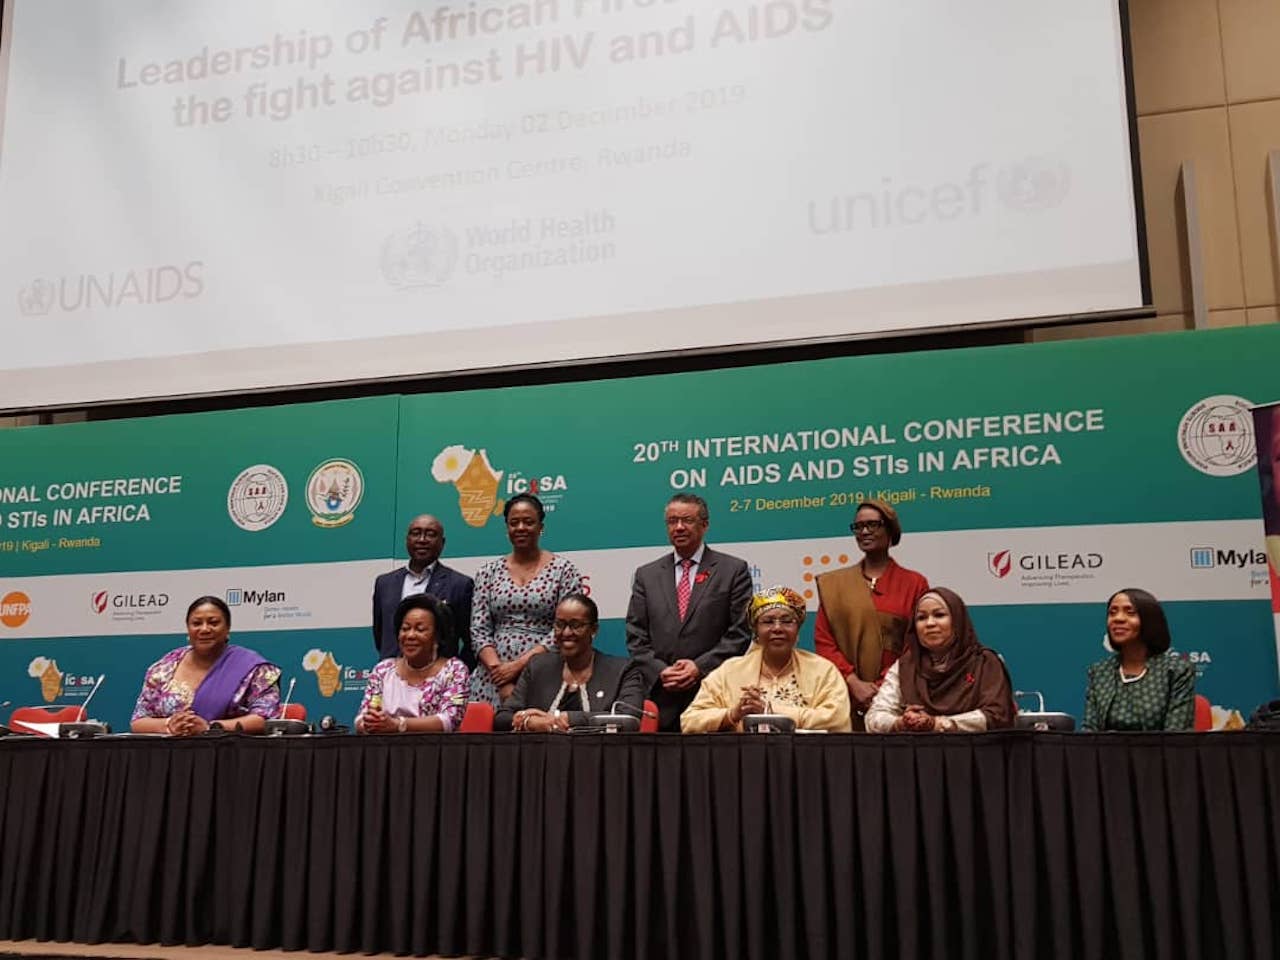 African First Ladies laud progress against HIV, urge more efforts